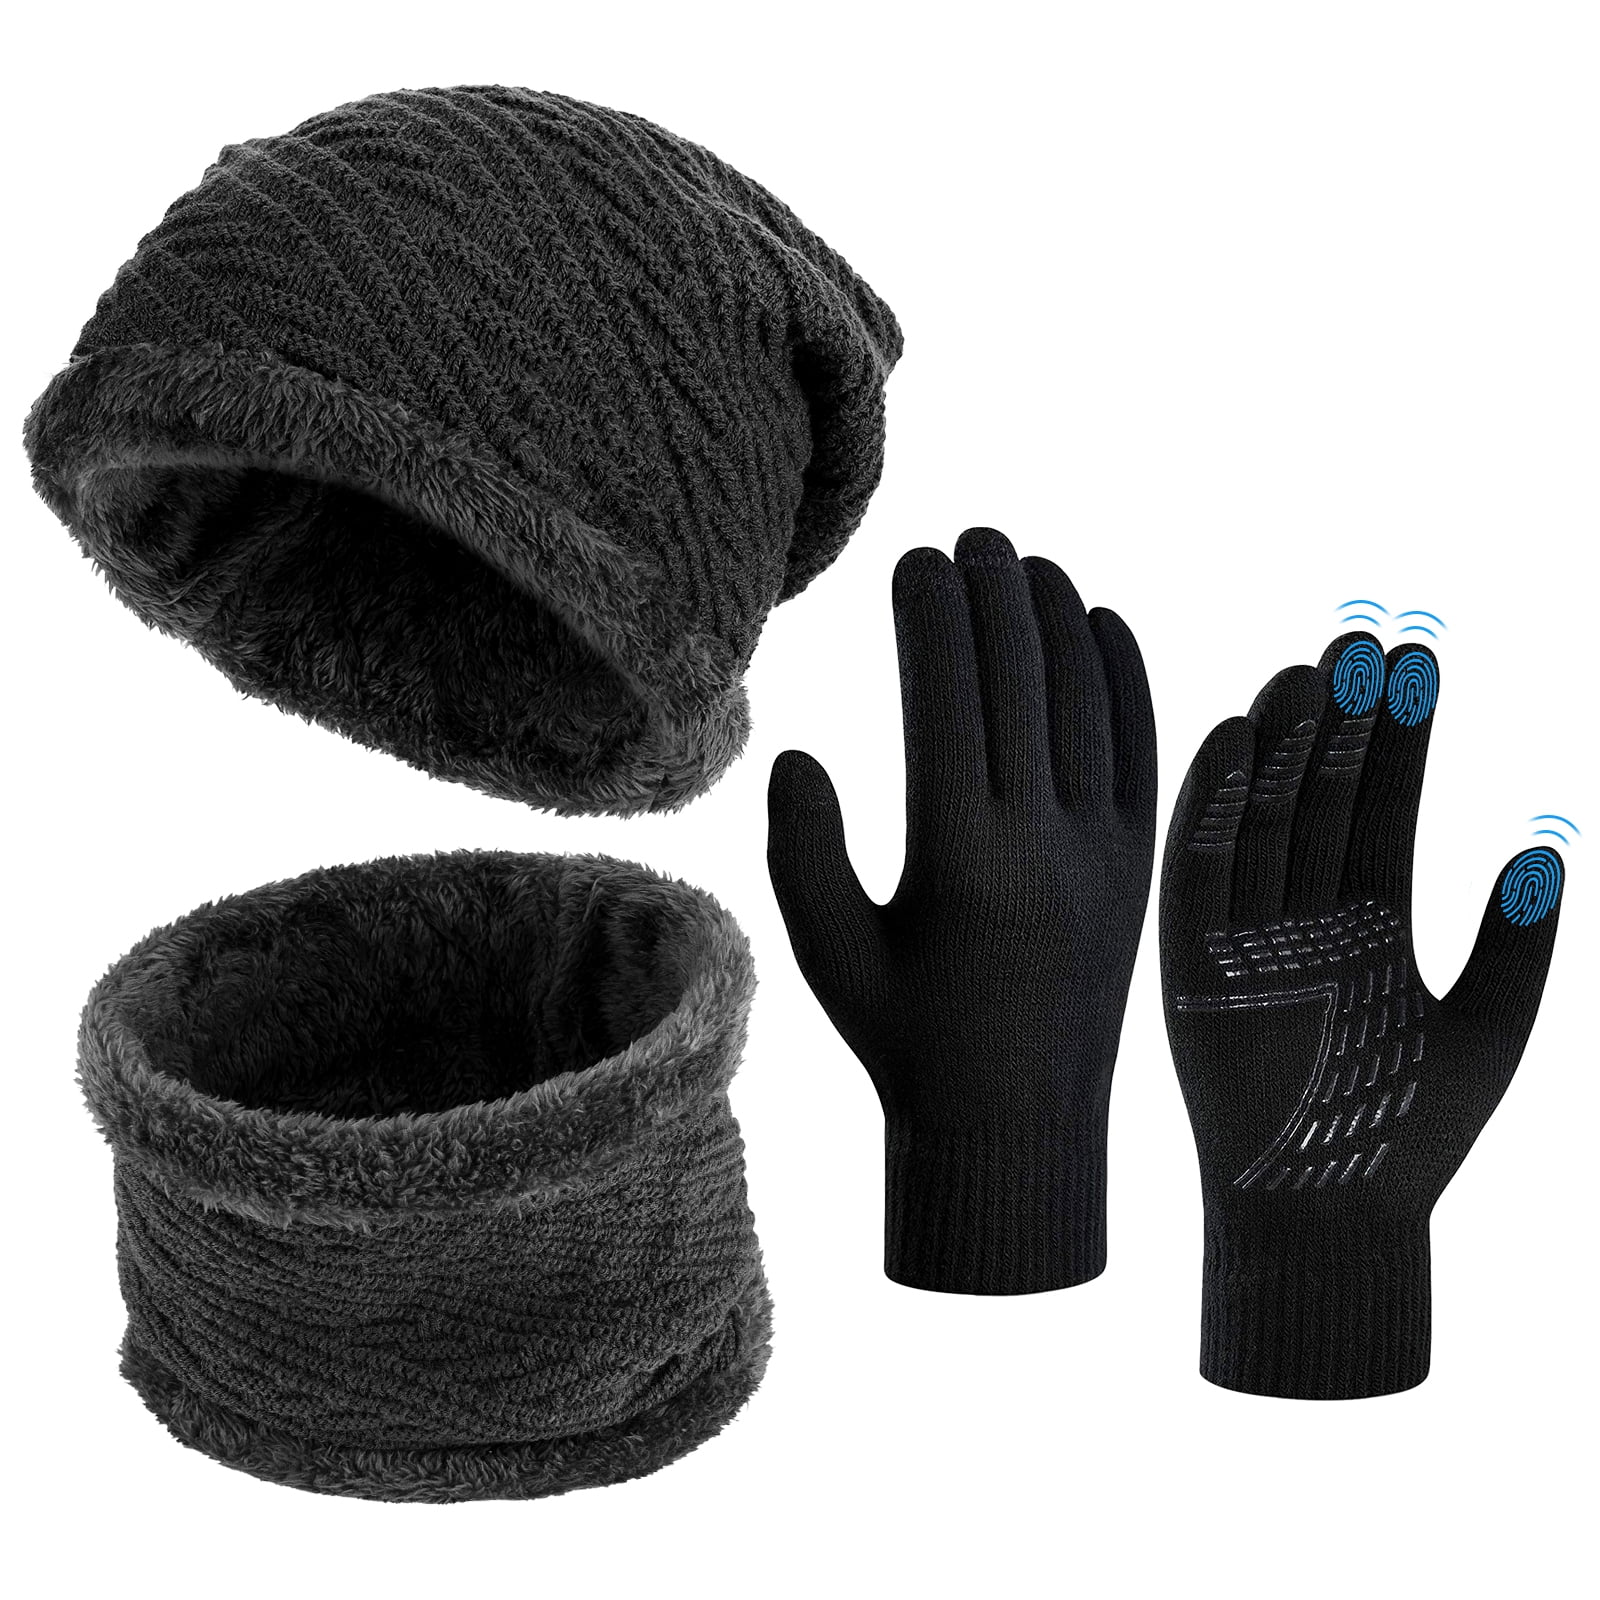 Gray Winter Beanie Hat Scarf Set for Men Touch Screen Gloves Knitted Cap 3 Piece 